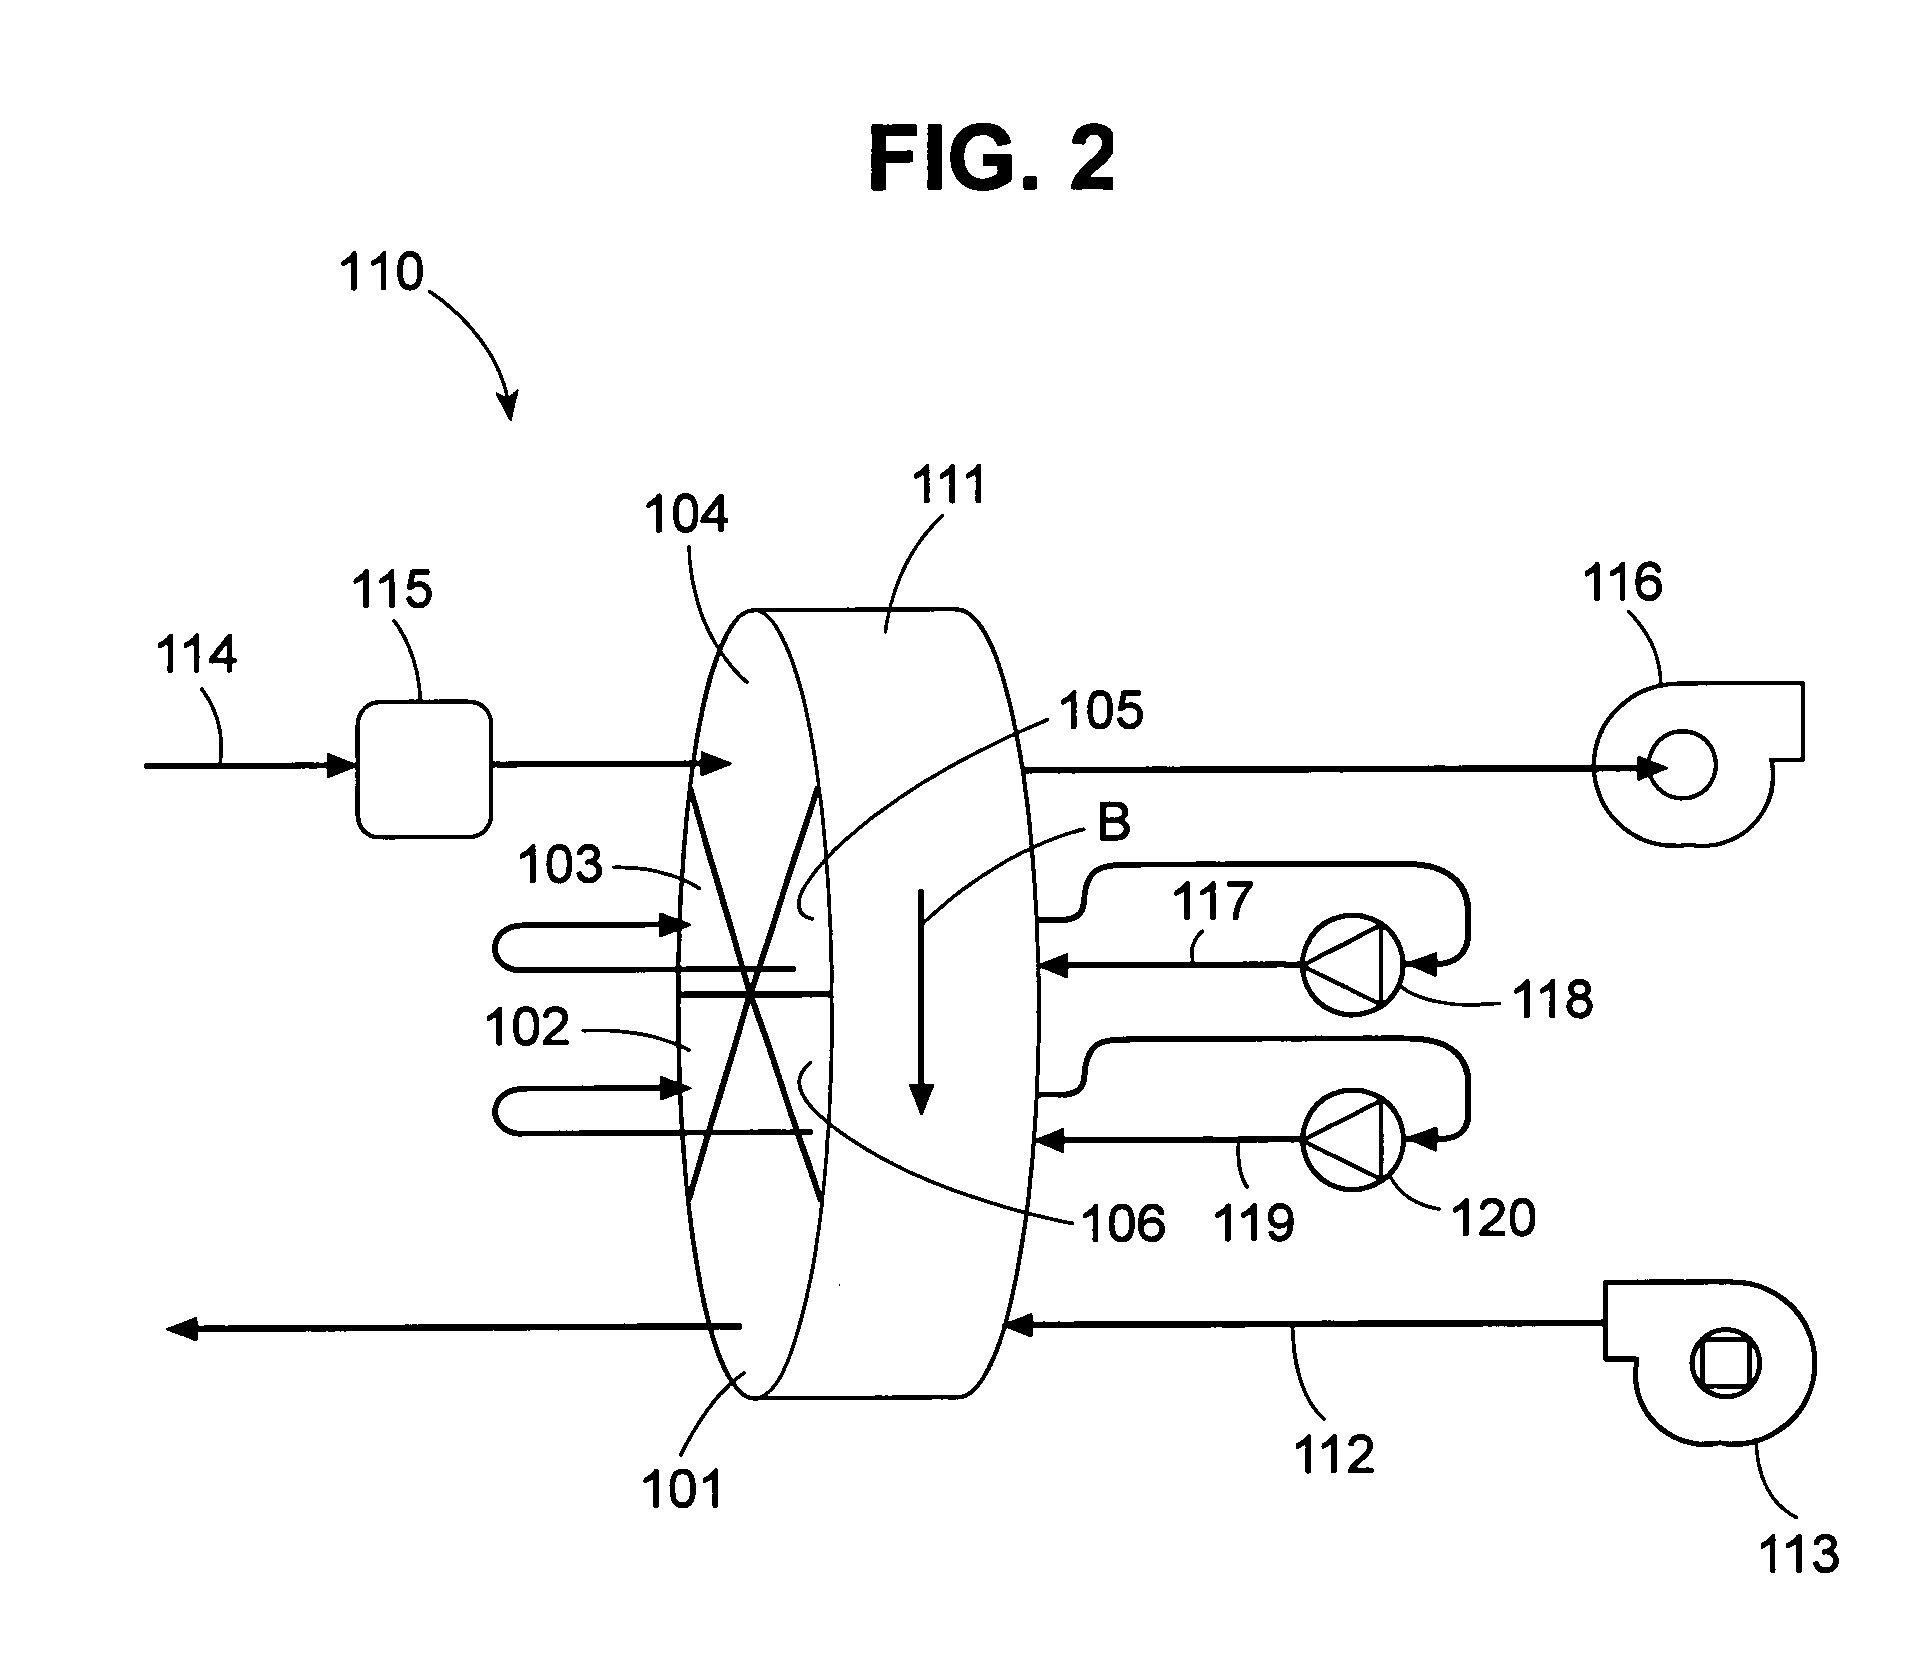 Rotary bed sorption system including at least one recycled isolation loop, and methods of designing and operating such a system